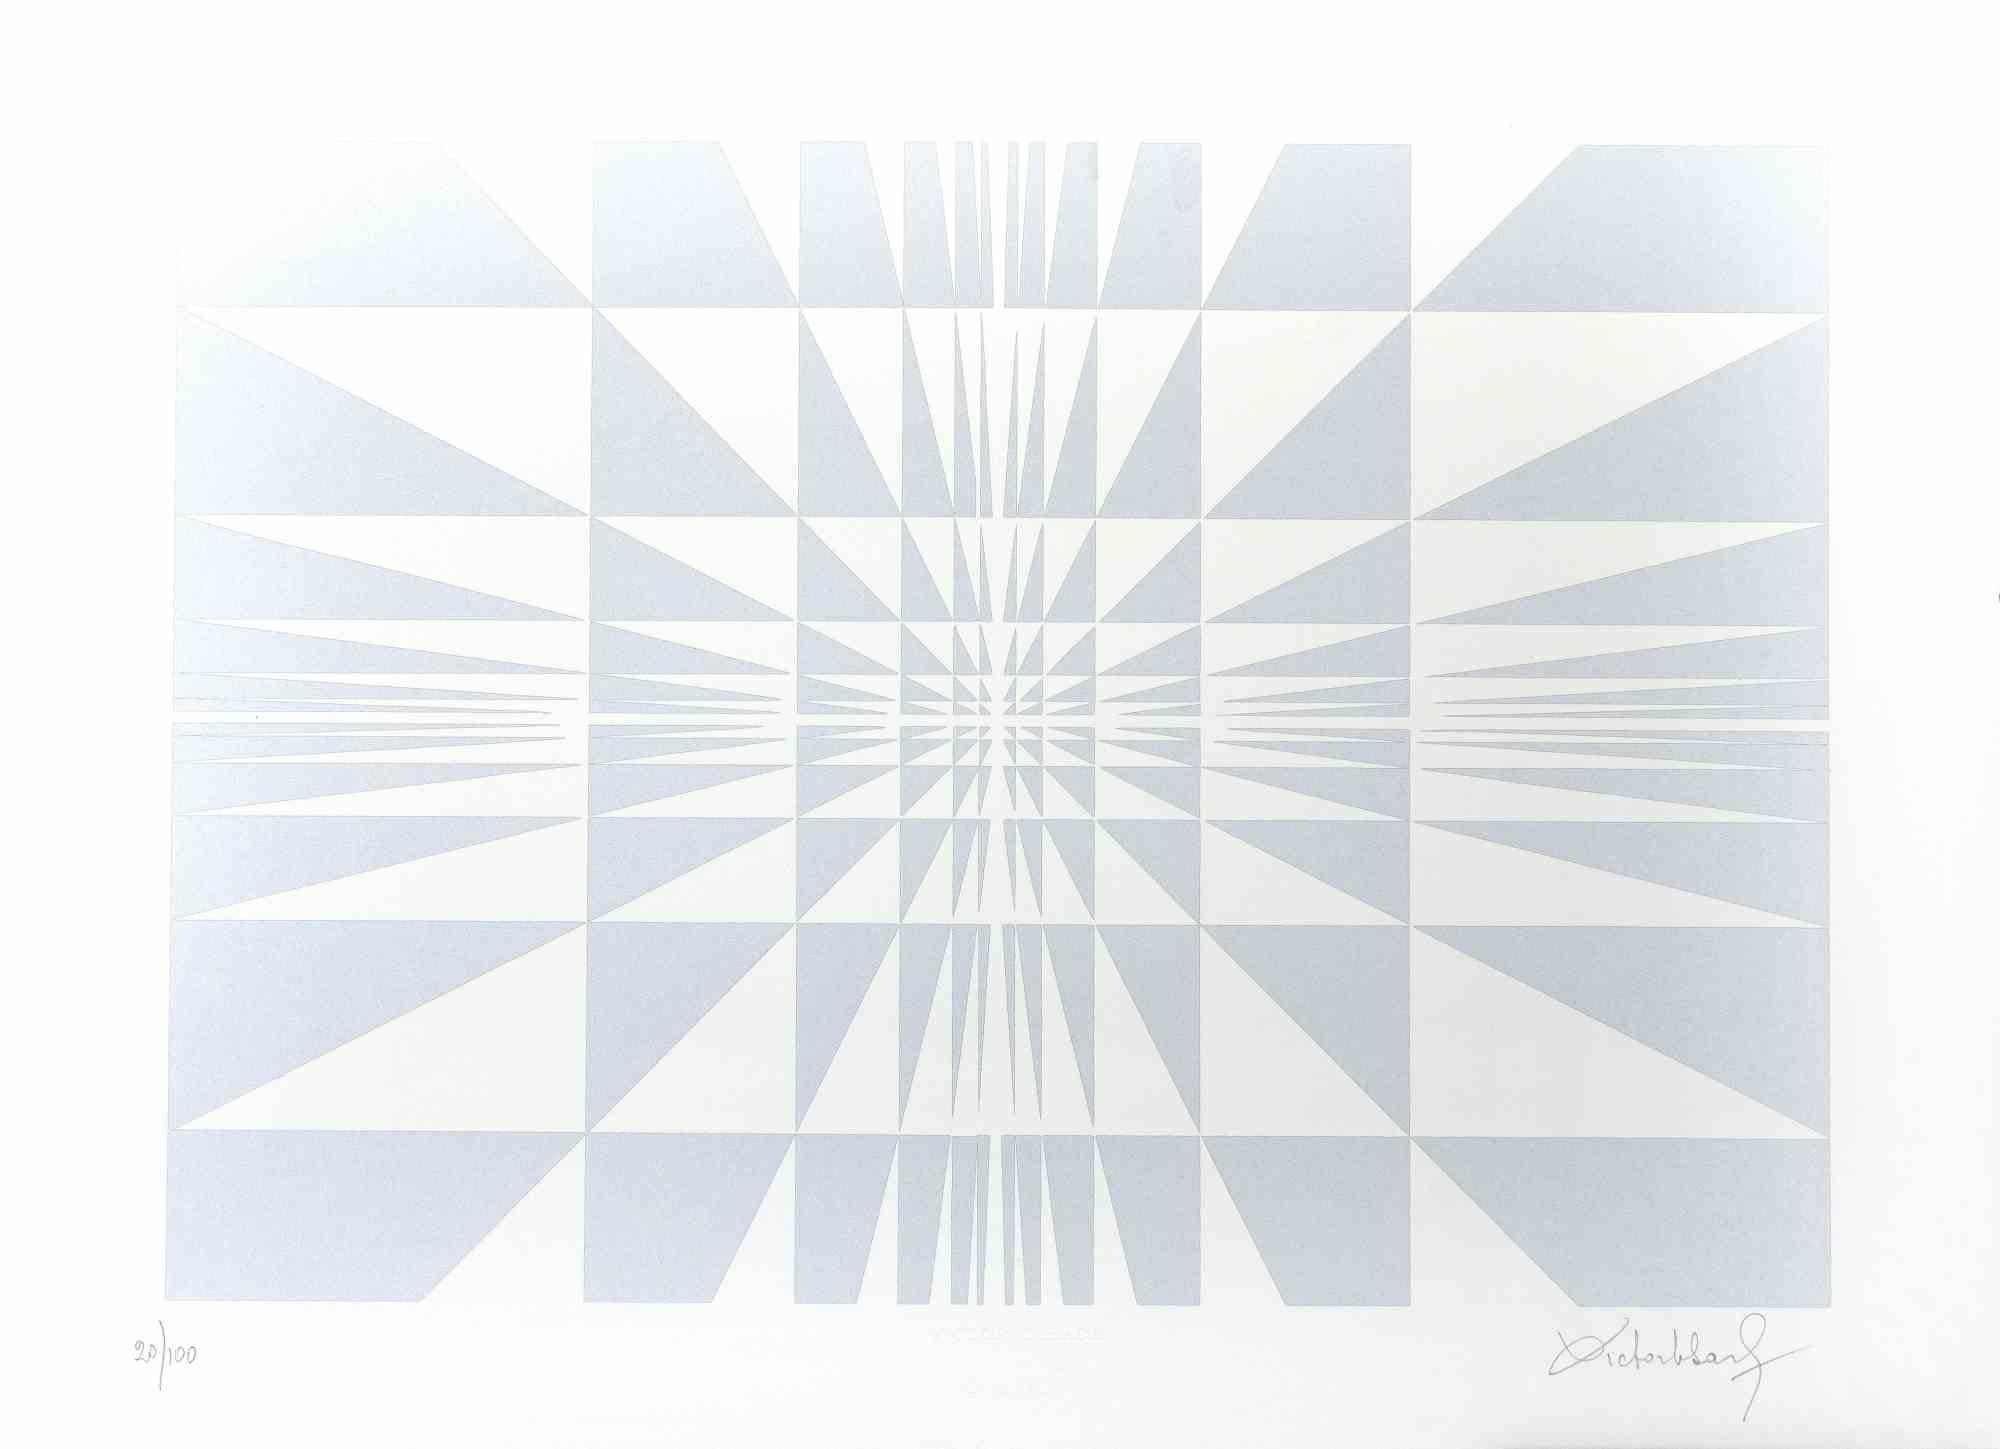 Abstract Silver Composition is a Screen Print on Paper realized by Victor Debach in 1970s.

Limited edition of 100 copies numbered and signed by the artist with pencil on the lower margin.

50 x 70 cm.

Edition 20/100

Very good condition on a white